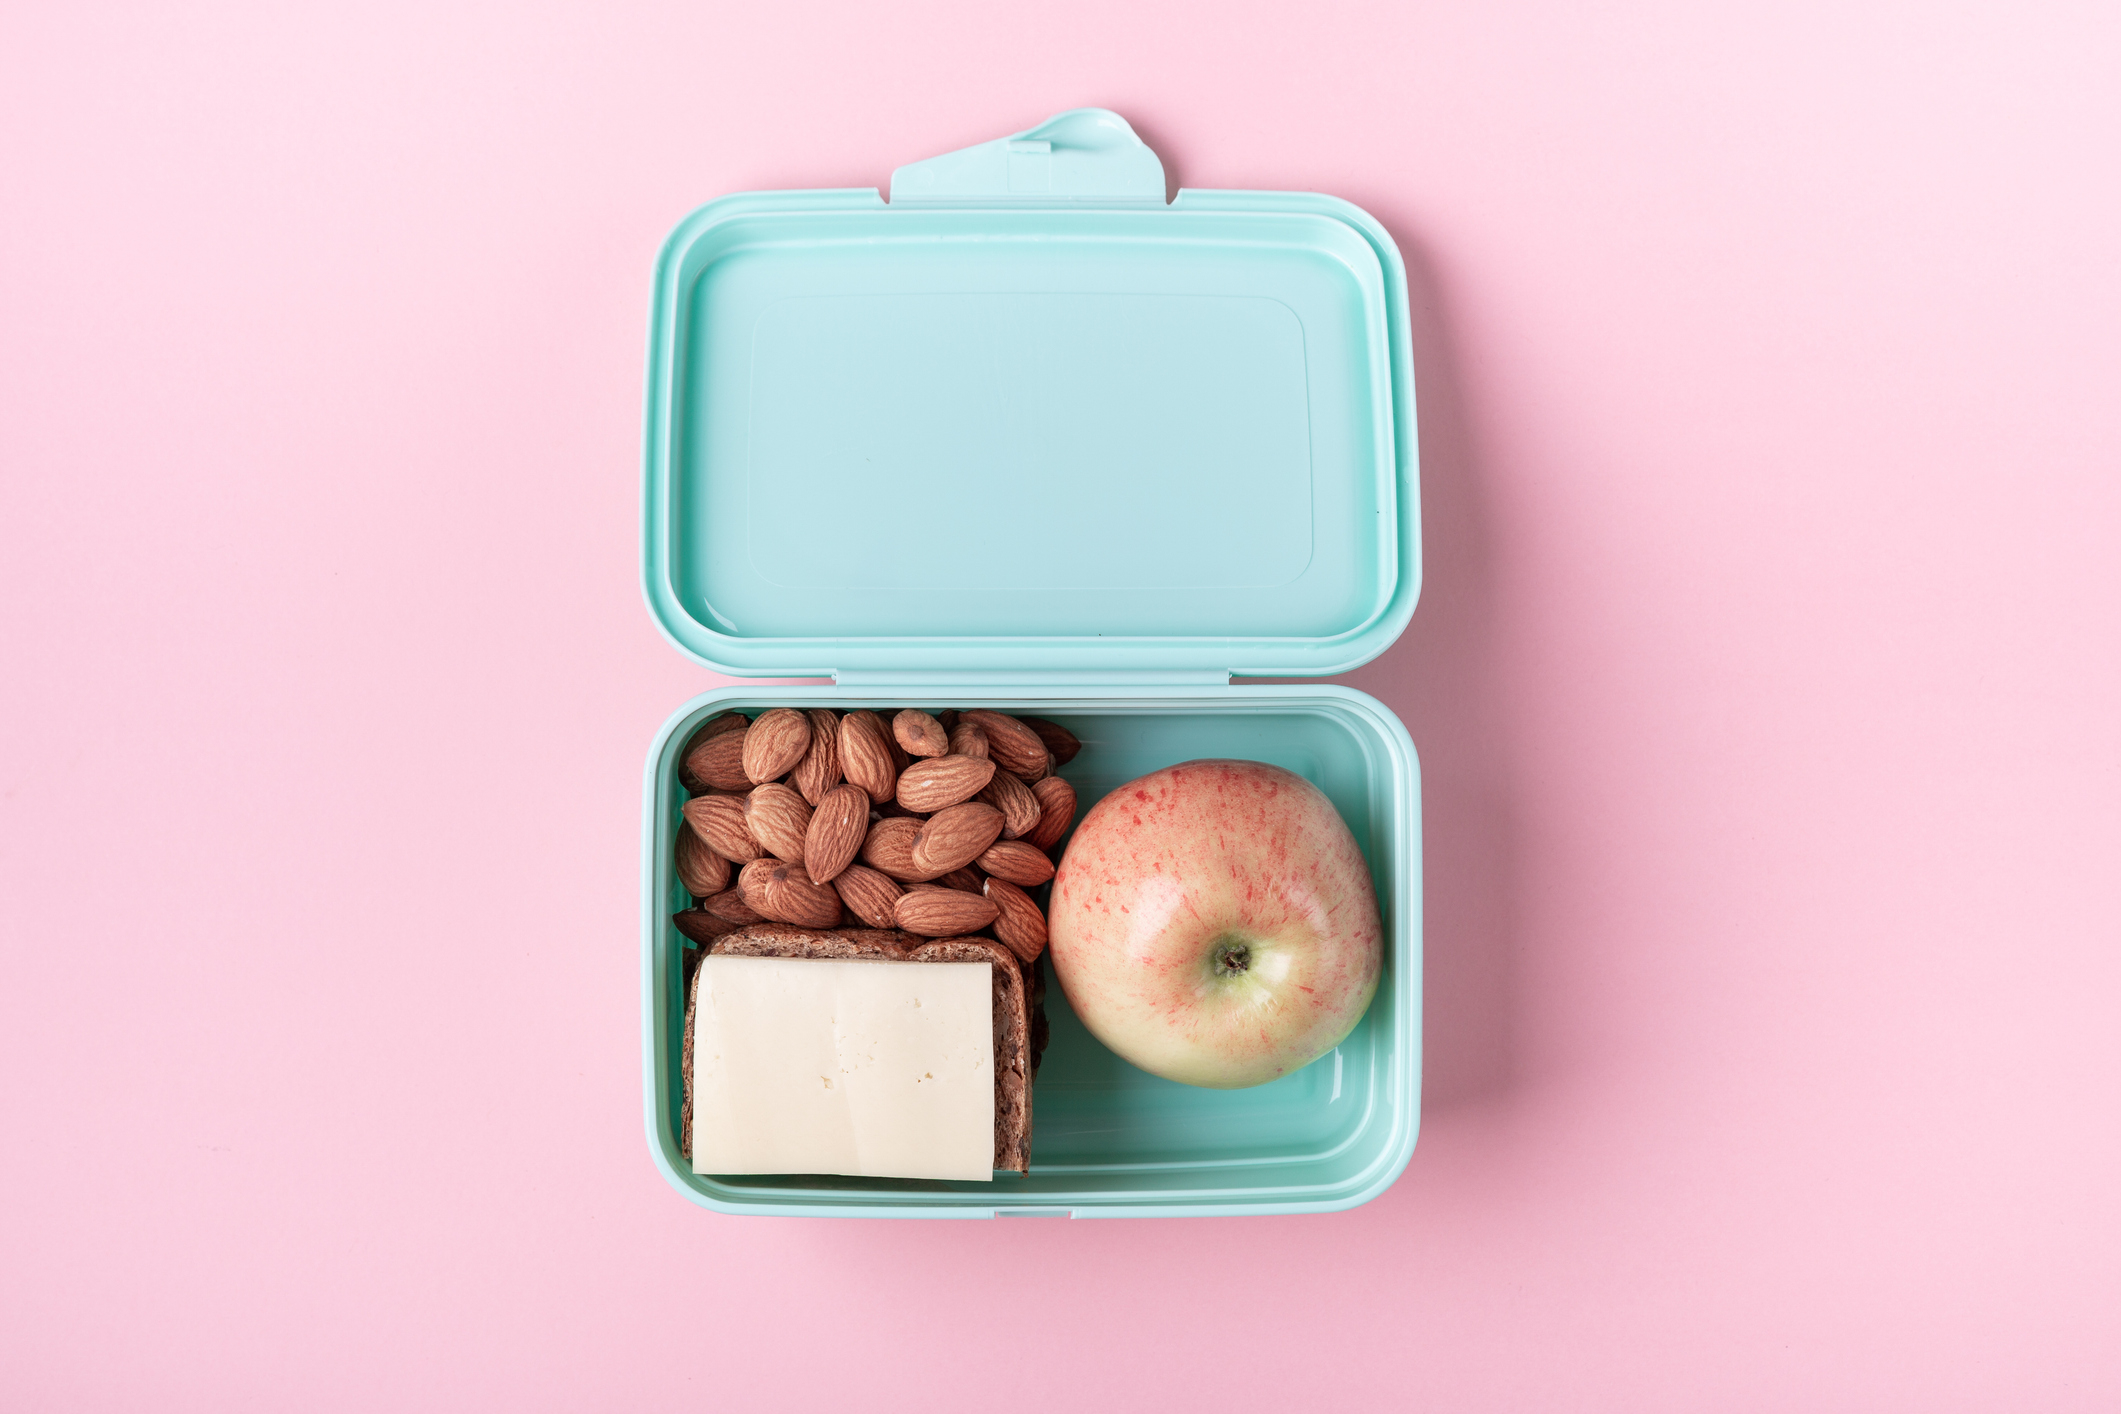 Lunchbox with almonds, an apple, and a sandwich on a pink background